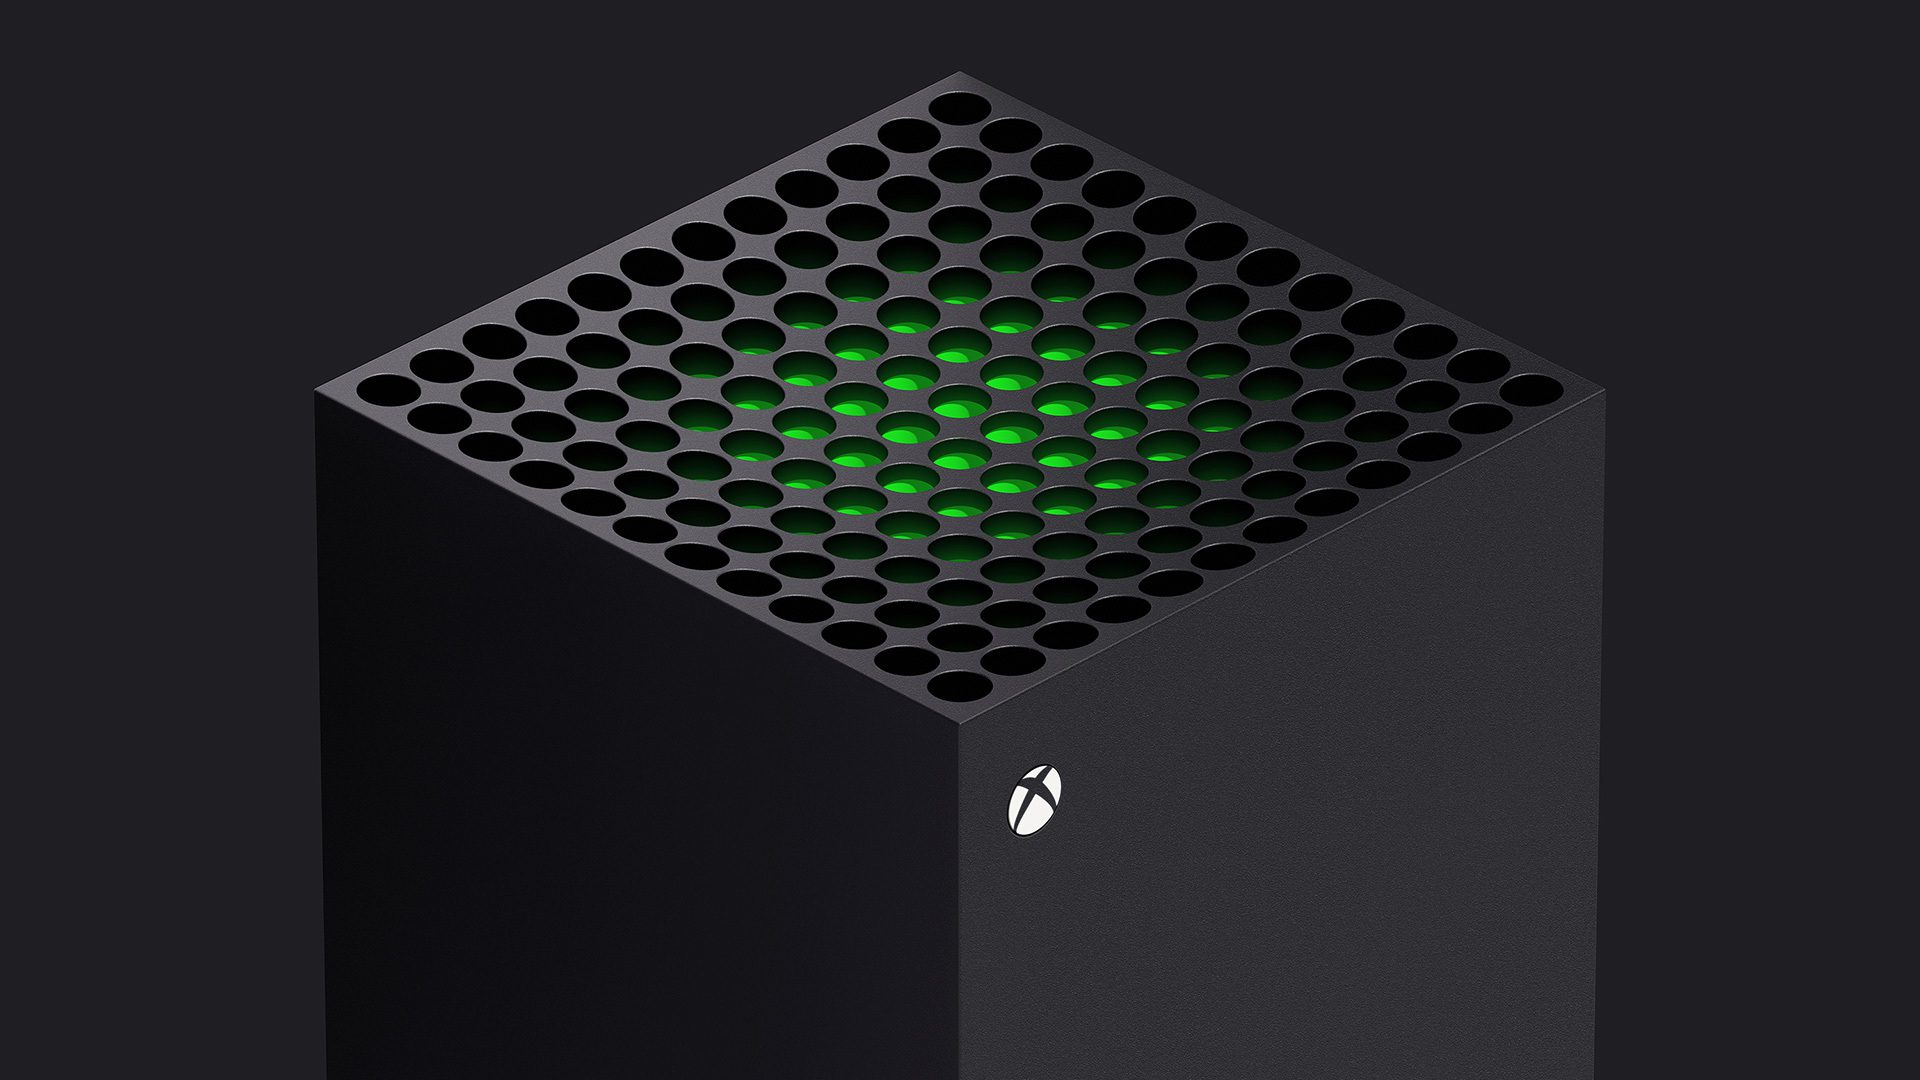 Leaked Low-Res Images Suggest a Digital-Only White Xbox Series X Could Be Coming Soon